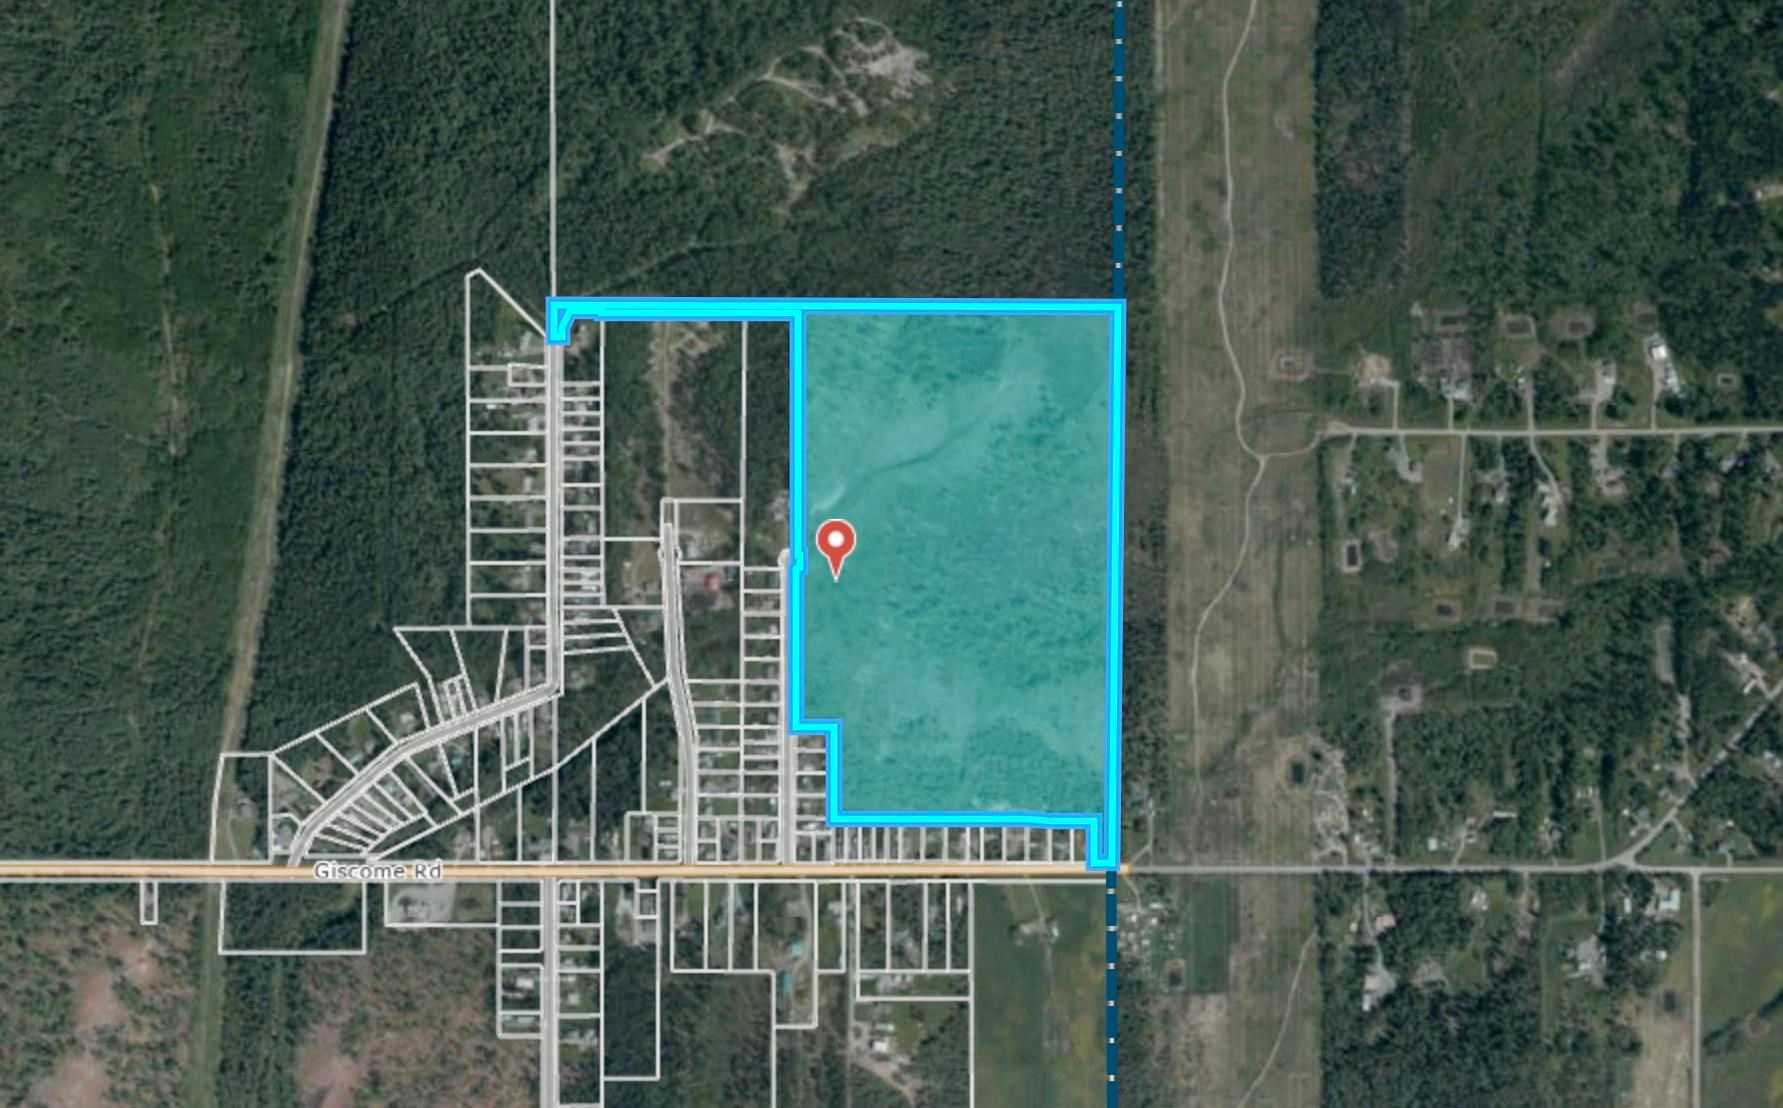 Main Photo: 1866 MCLAREN Road in Prince George: South Blackburn Land for sale (PG City South East (Zone 75))  : MLS®# R2605246